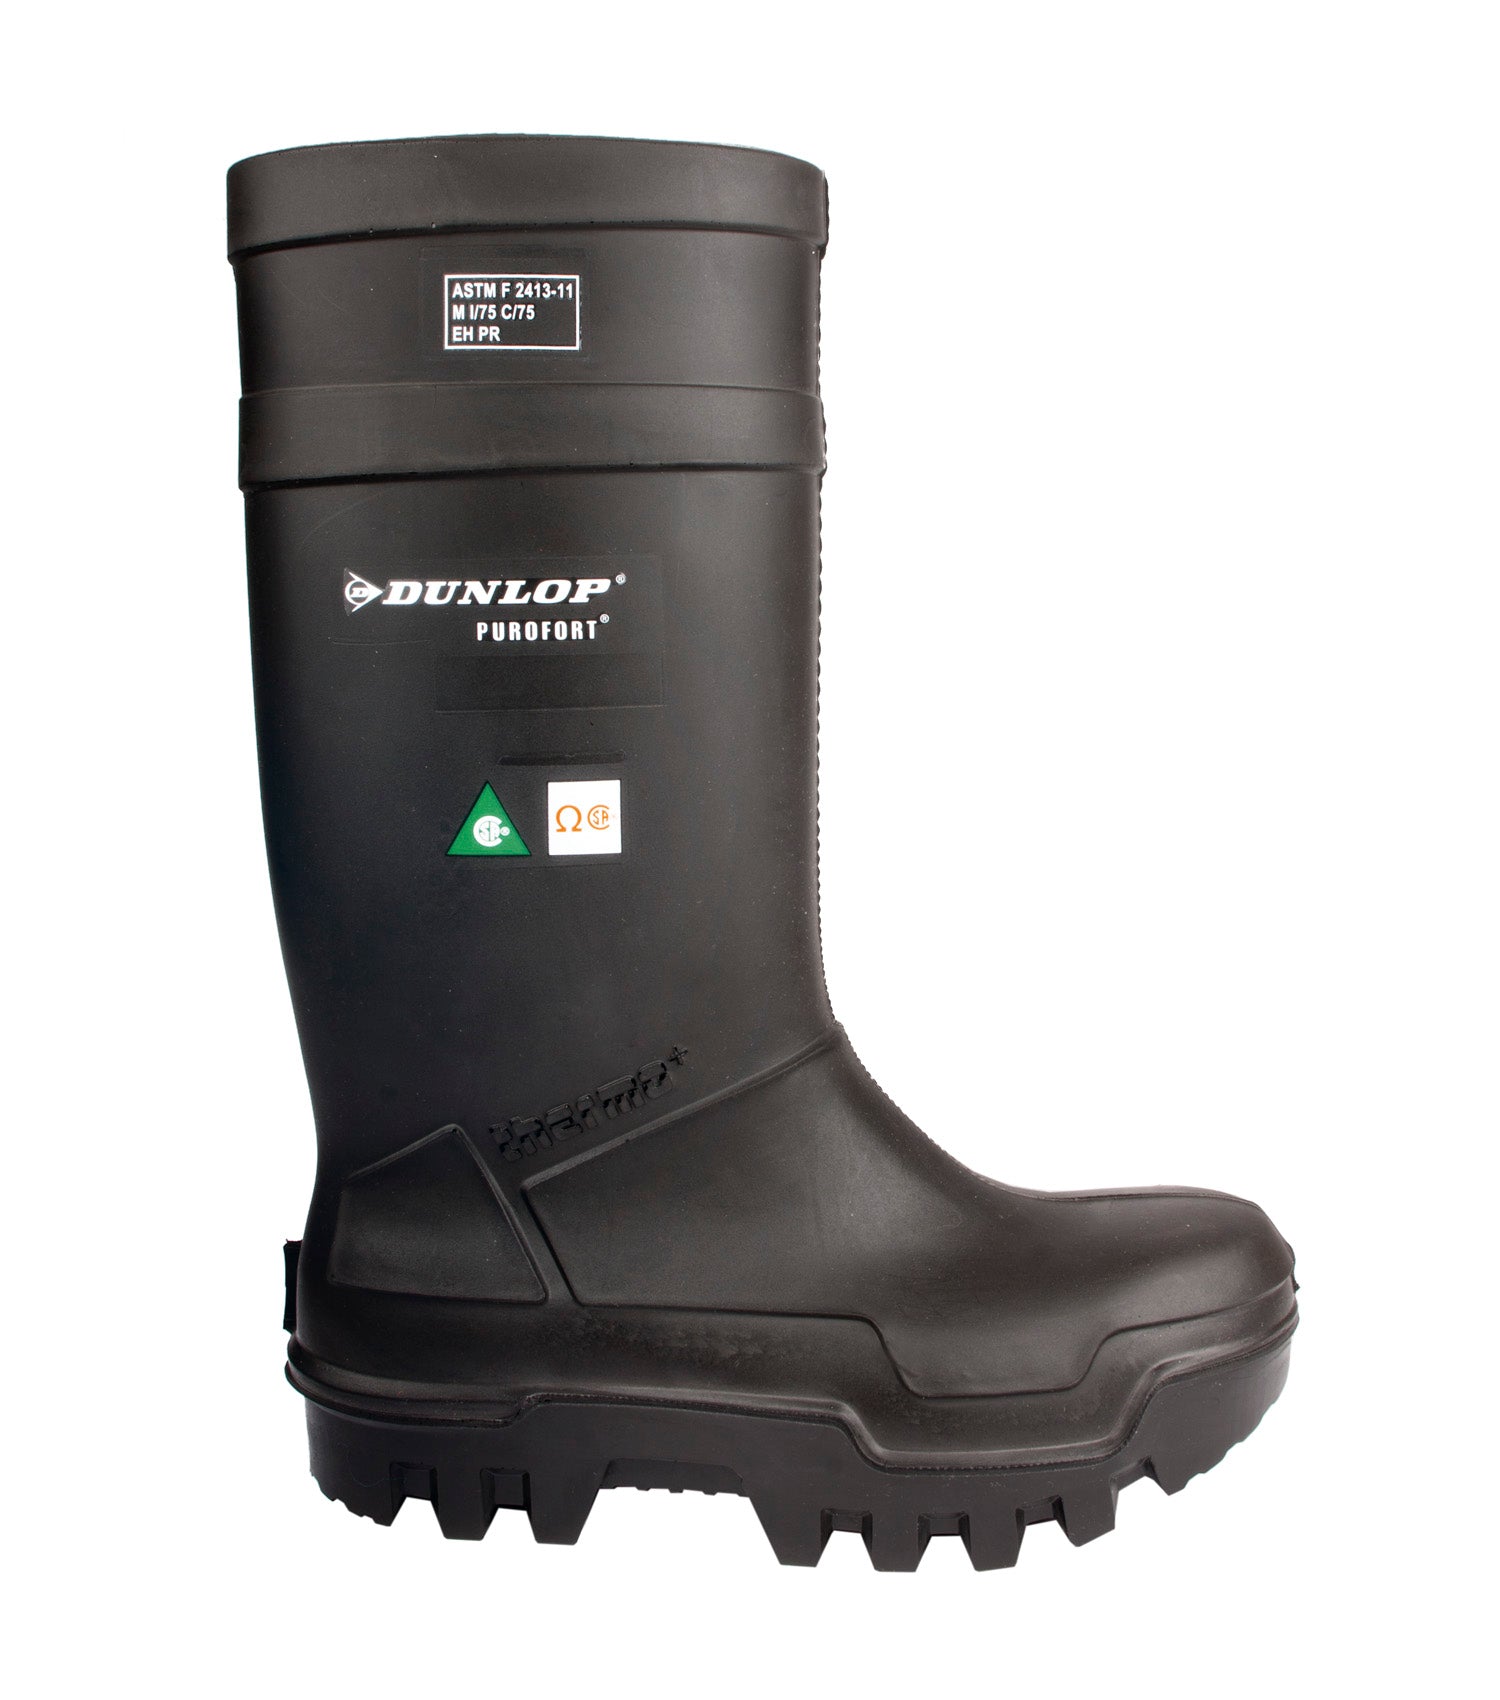 Dunlop Purofort Thermo+Full Safety Boot 